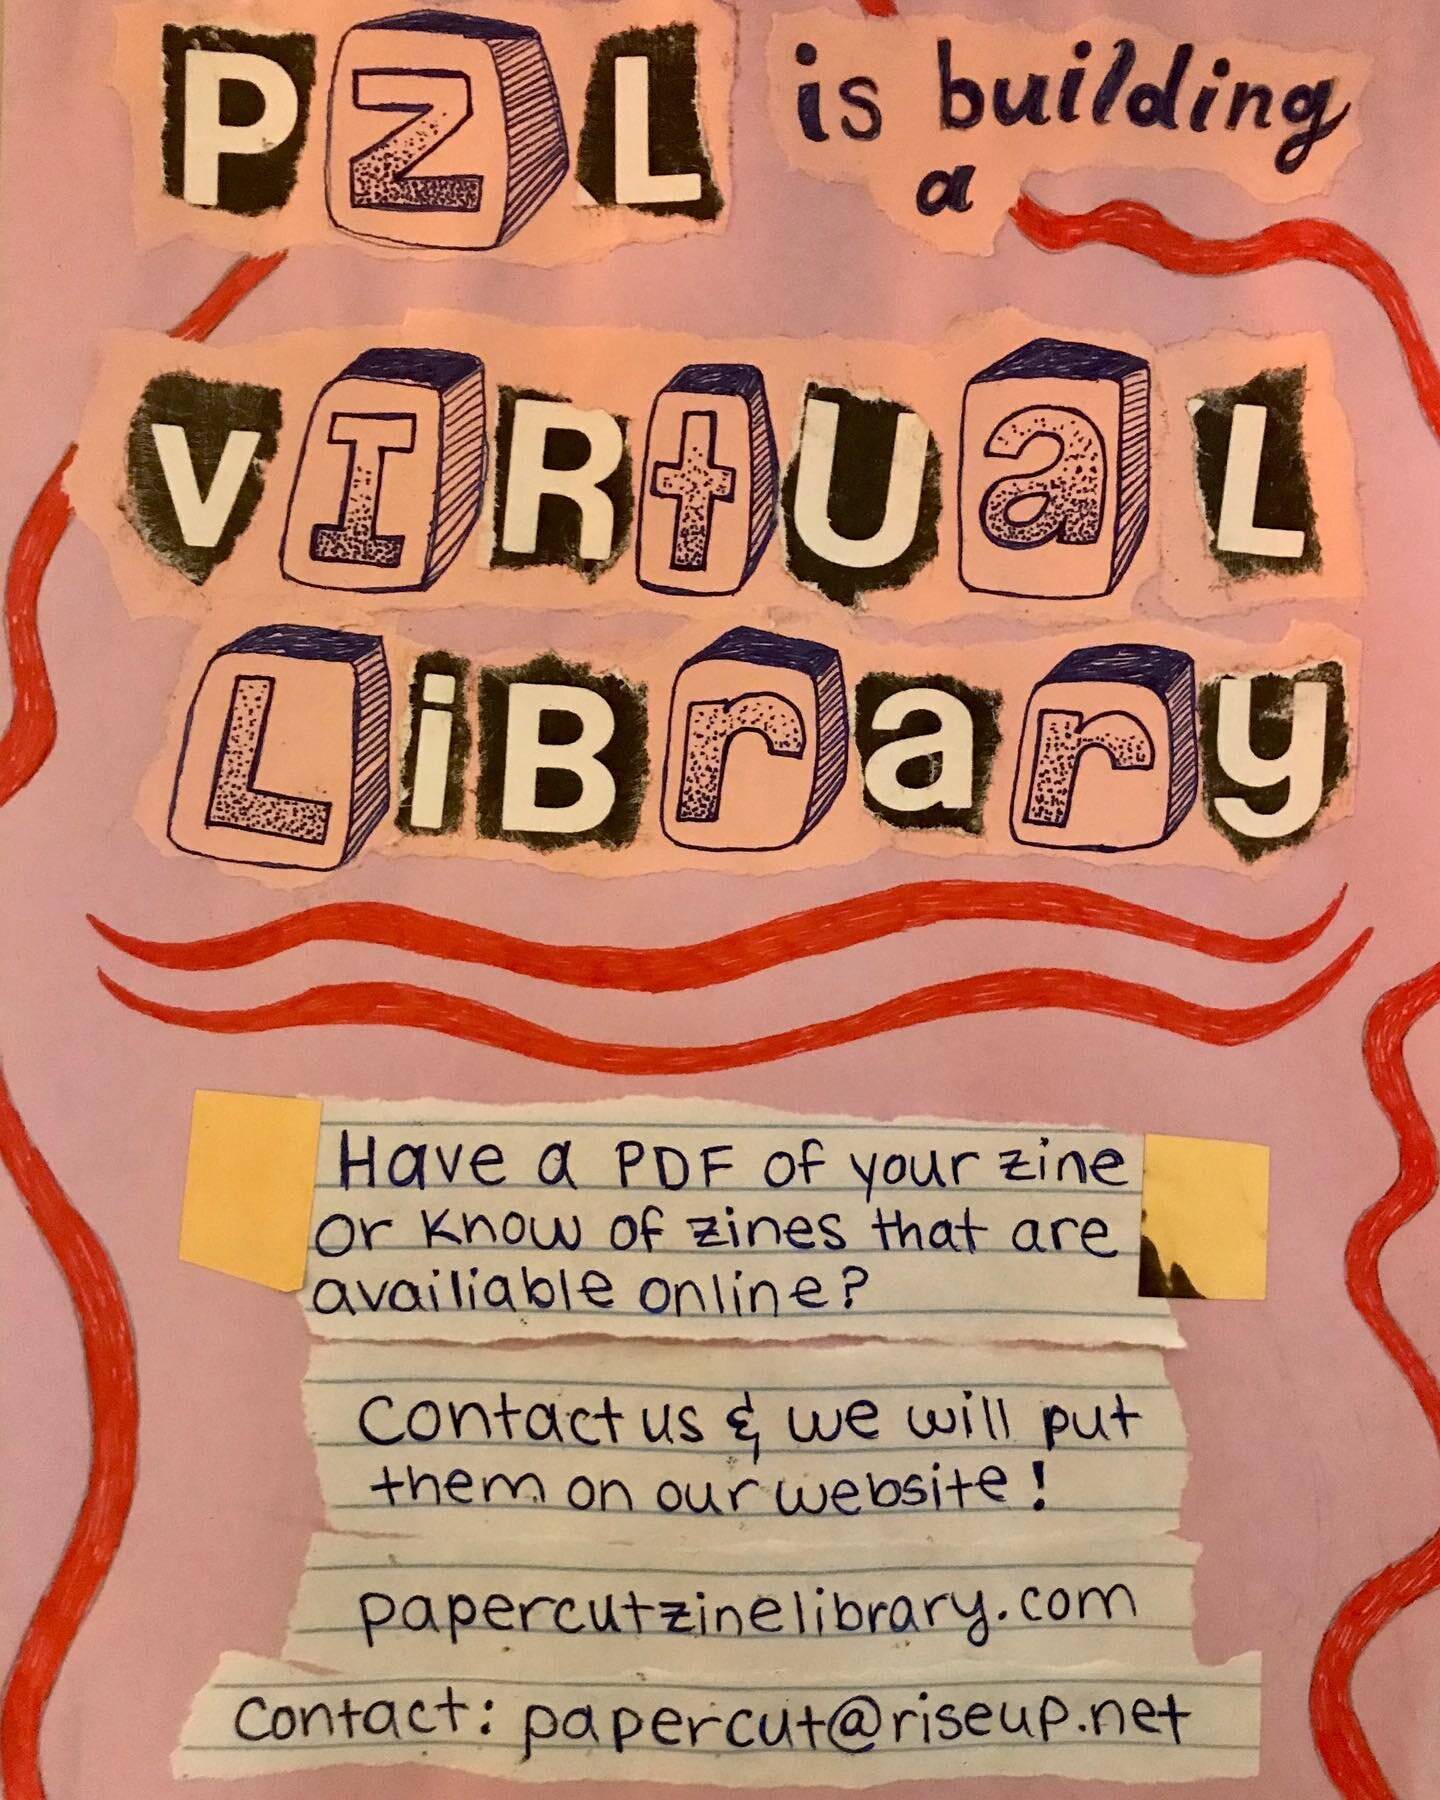 Pzl is building a virtual library! Have a pdf of your zine or know of zines that are available online? Contact us and we will put them on our website! papercutzinelibrary.com // contact: papercut@riseup.net